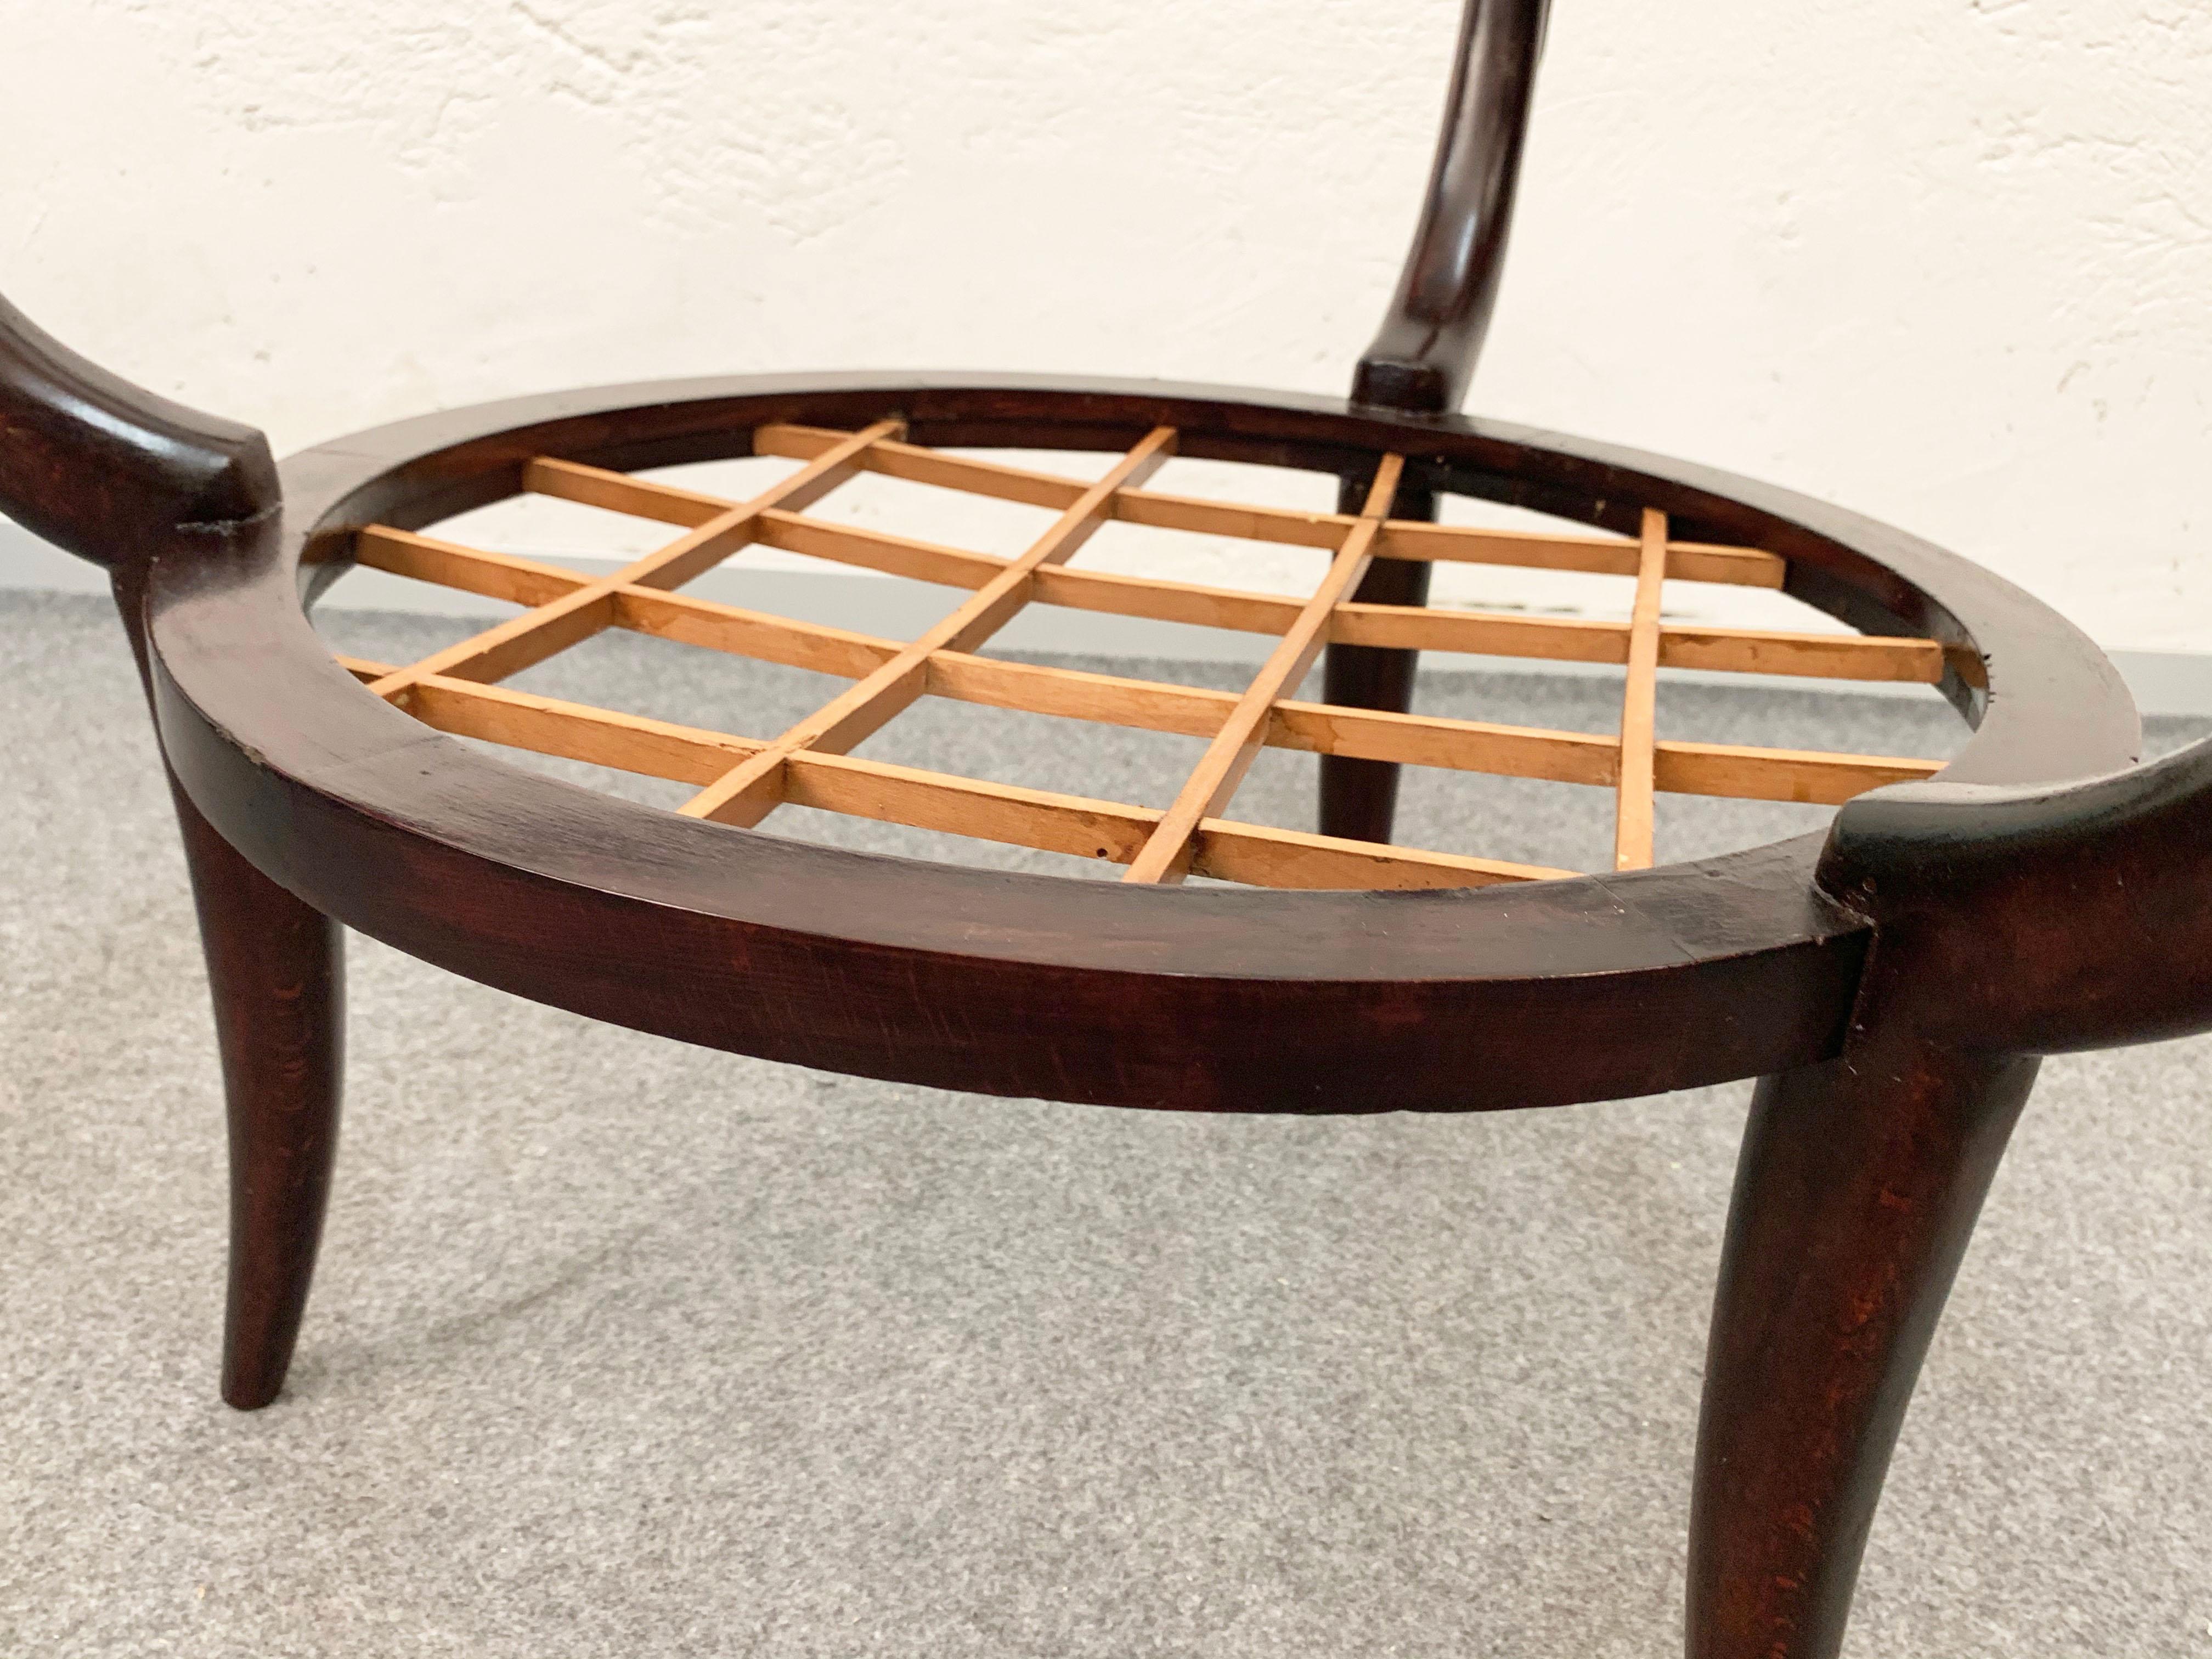 Two-level Round Wood and Glass Italian Coffee Table Gio Ponti Style, 1950s For Sale 8